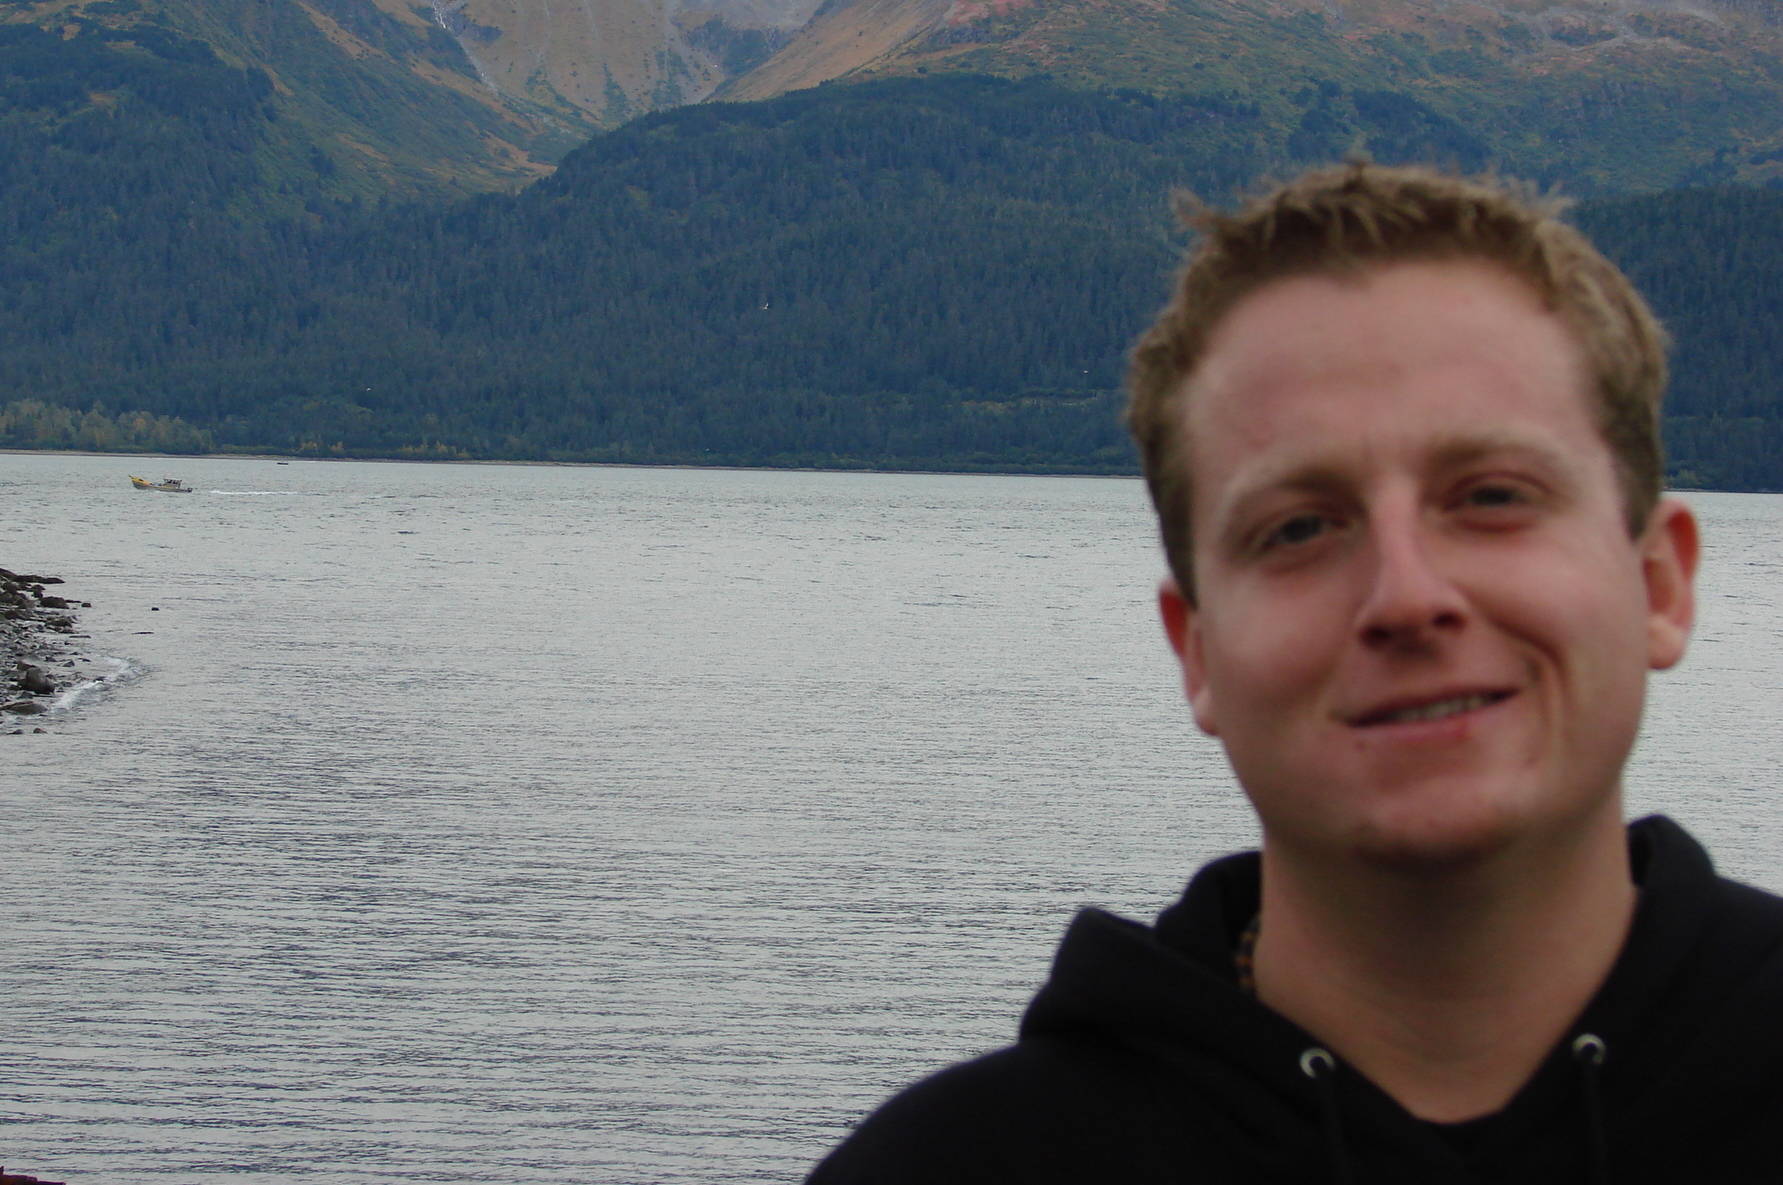 Kelly Michael Stevens, pictured here in 2007, was shot and killed during an encounter with a Juneau Police Department officer on Dec. 29, 2019. The family is filing a wrongful death suit against the JPD, the City and Borough of Juneau, and the officer involved in the shooting. (Courtesy photo / Ben Crittenden)